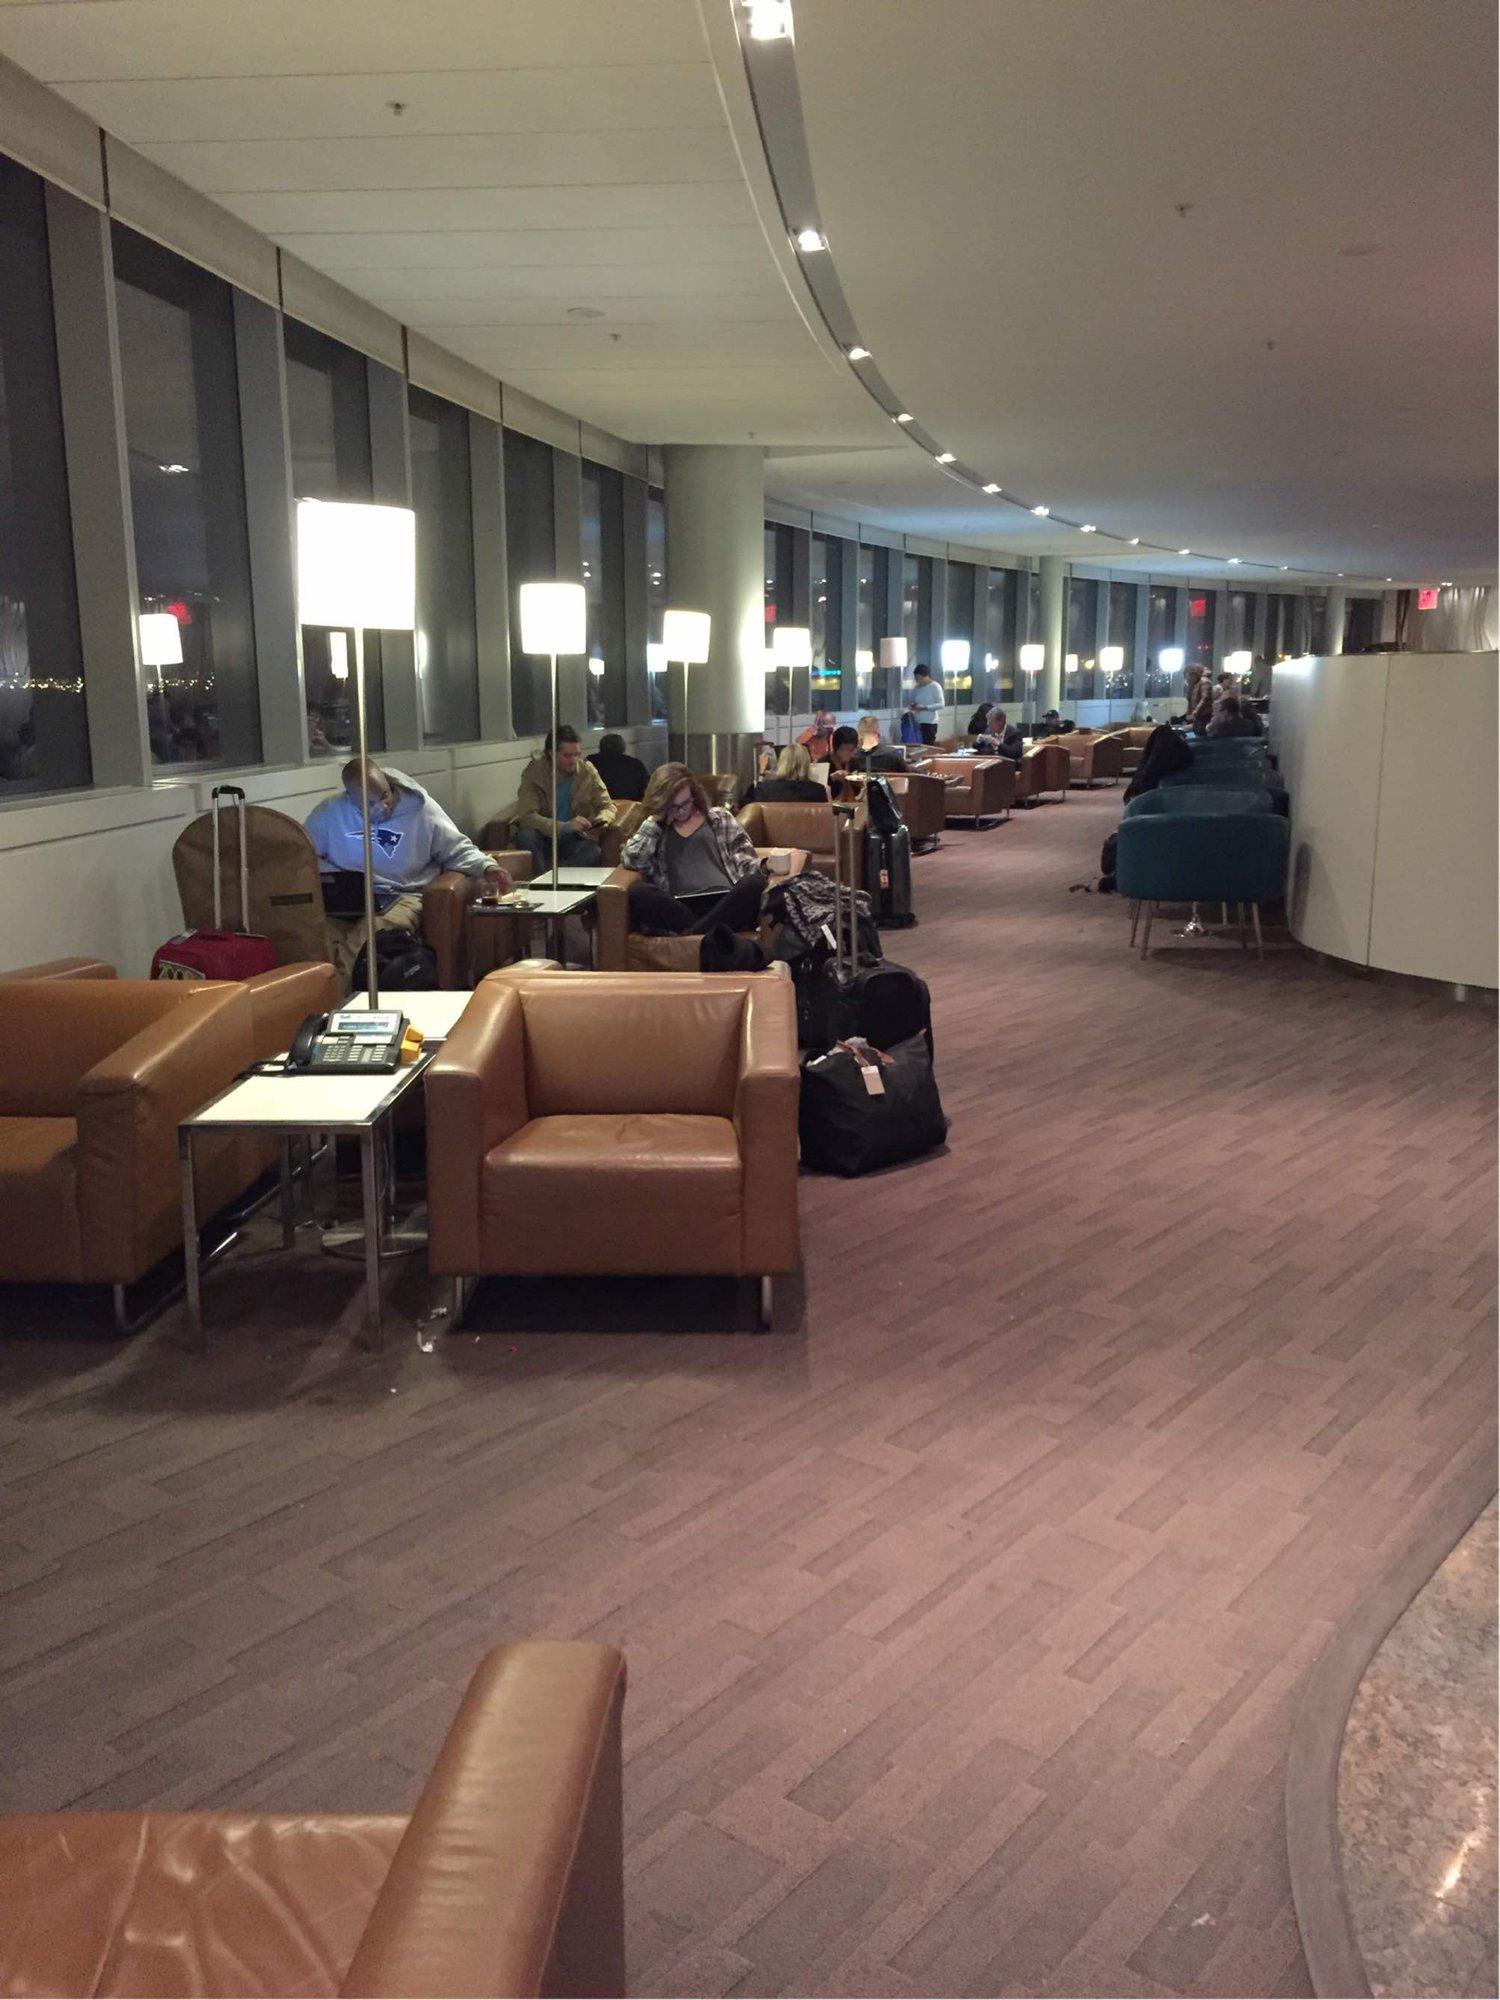 Air Canada Maple Leaf Lounge image 25 of 30